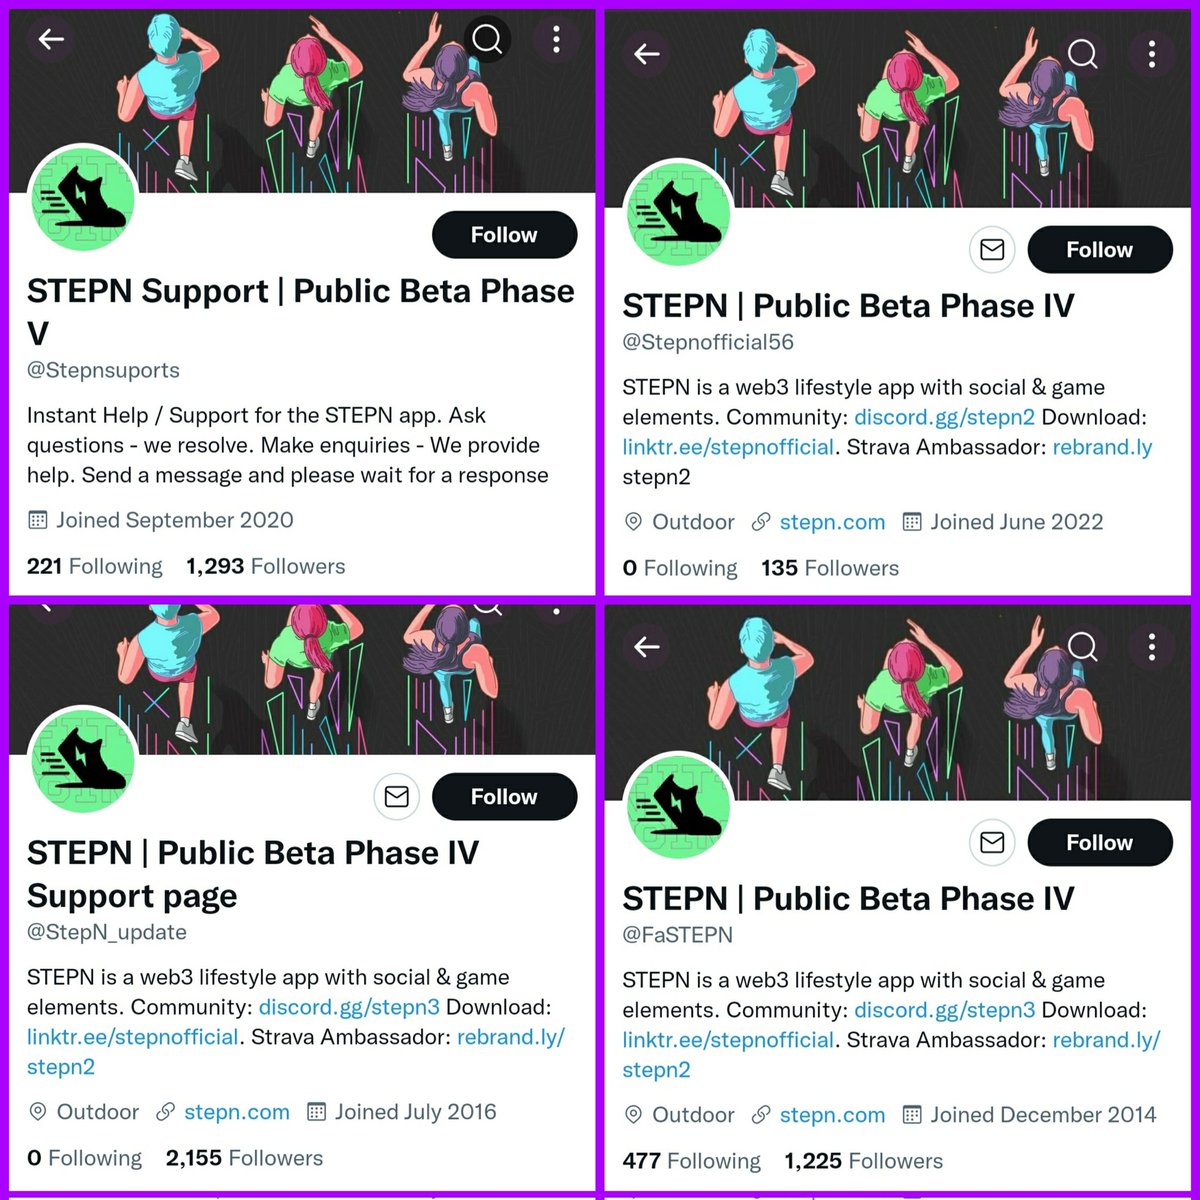 Dear #STEPN friends, let's report these scammer accounts- 1. @NikhilS59260562 2. @fiherce 3. @Stepnofficial24 4. @TheRichardXIII 5. @stepnsuports 6. @Stepnofficial56 7. @StepN_update 8. @FaSTEPN ⚠️Let's keep our community safe from these frauds 🤝